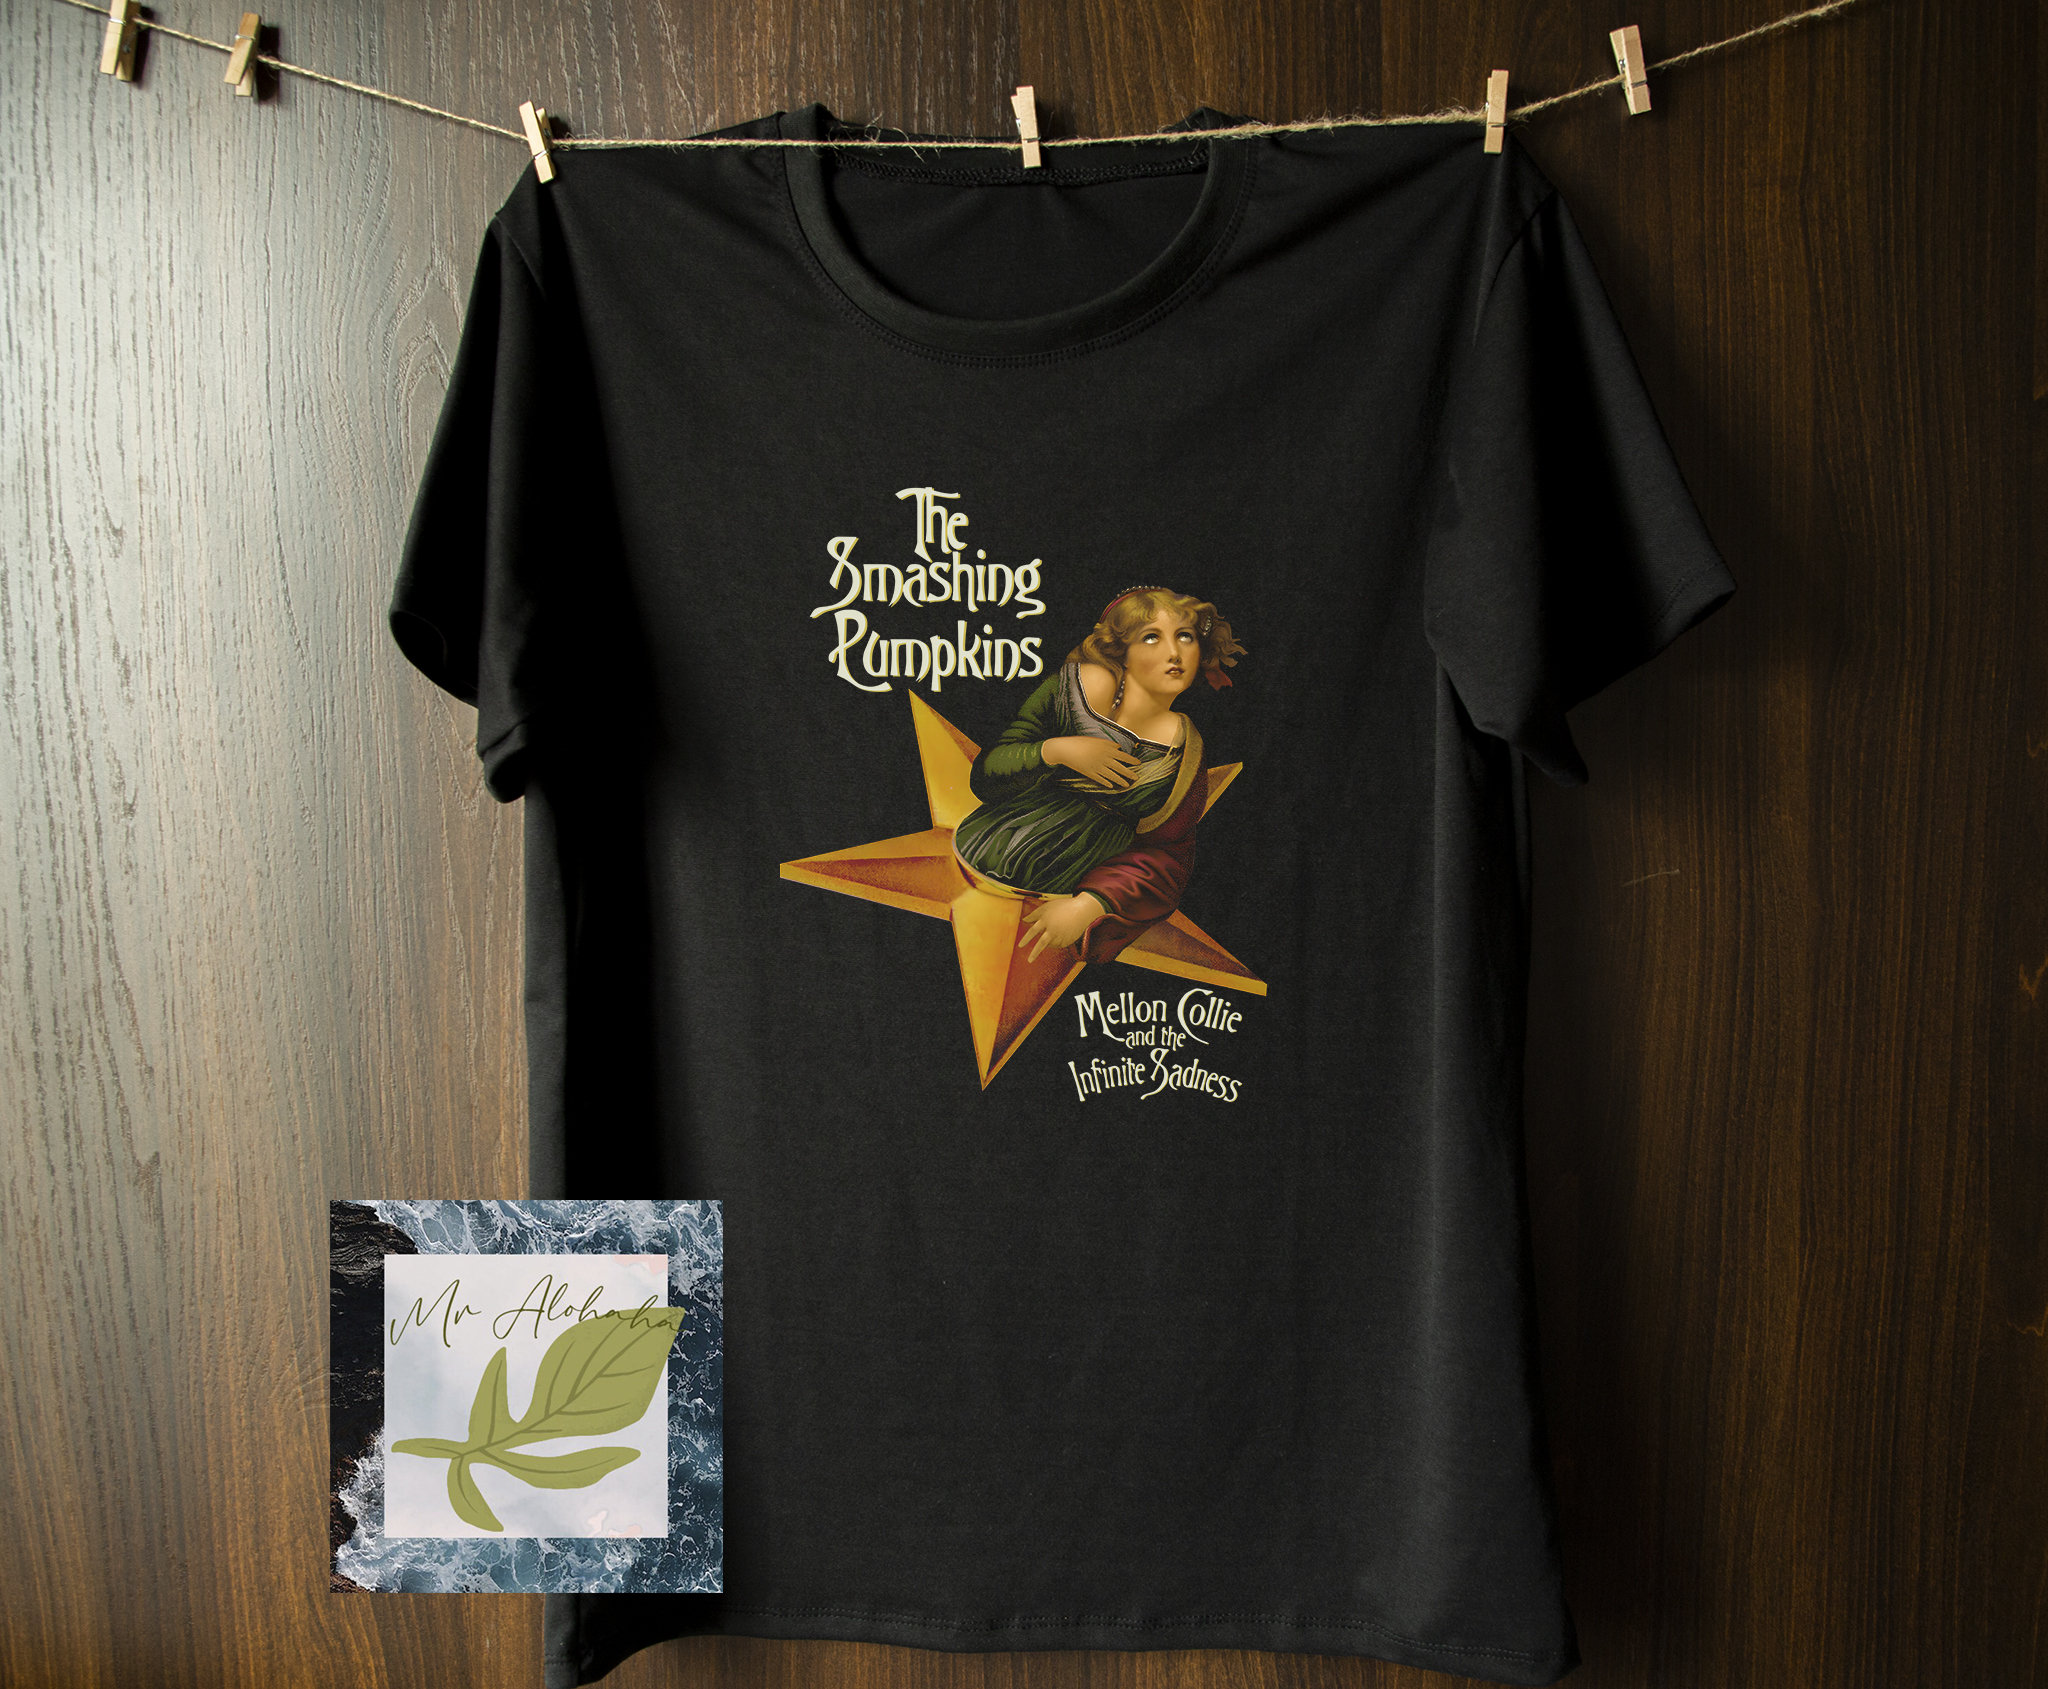 Discover The Smashing Pumpkins Mellon Collie and the Infinite Sadness T-shirt, Vintage Style